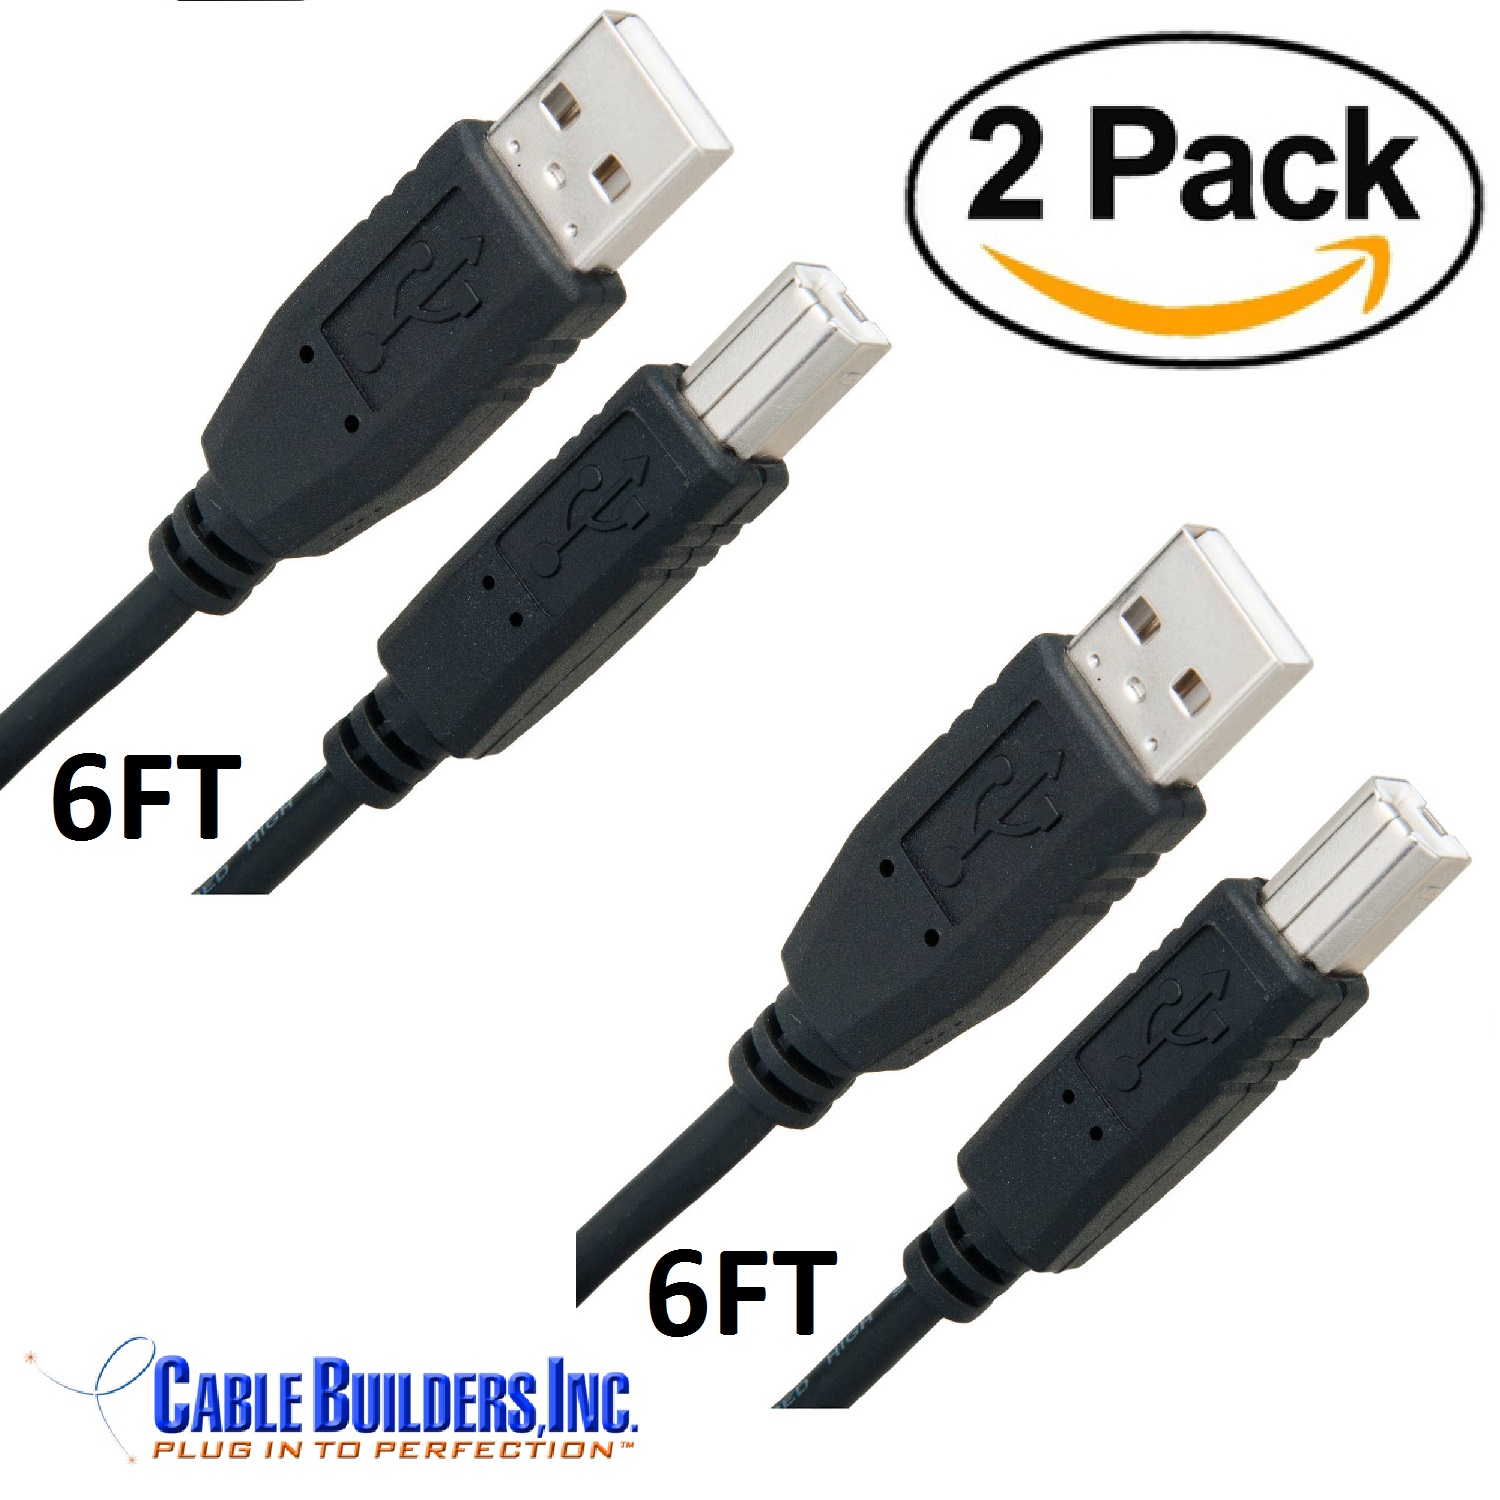 Cable Builders [2-PACK] USB Printer Cable USB Type A Male to B Male Cable (6FT x 2) High Speed USB 2.0 Type A-B 6ft x 2 Cords for Printers - image 2 of 2